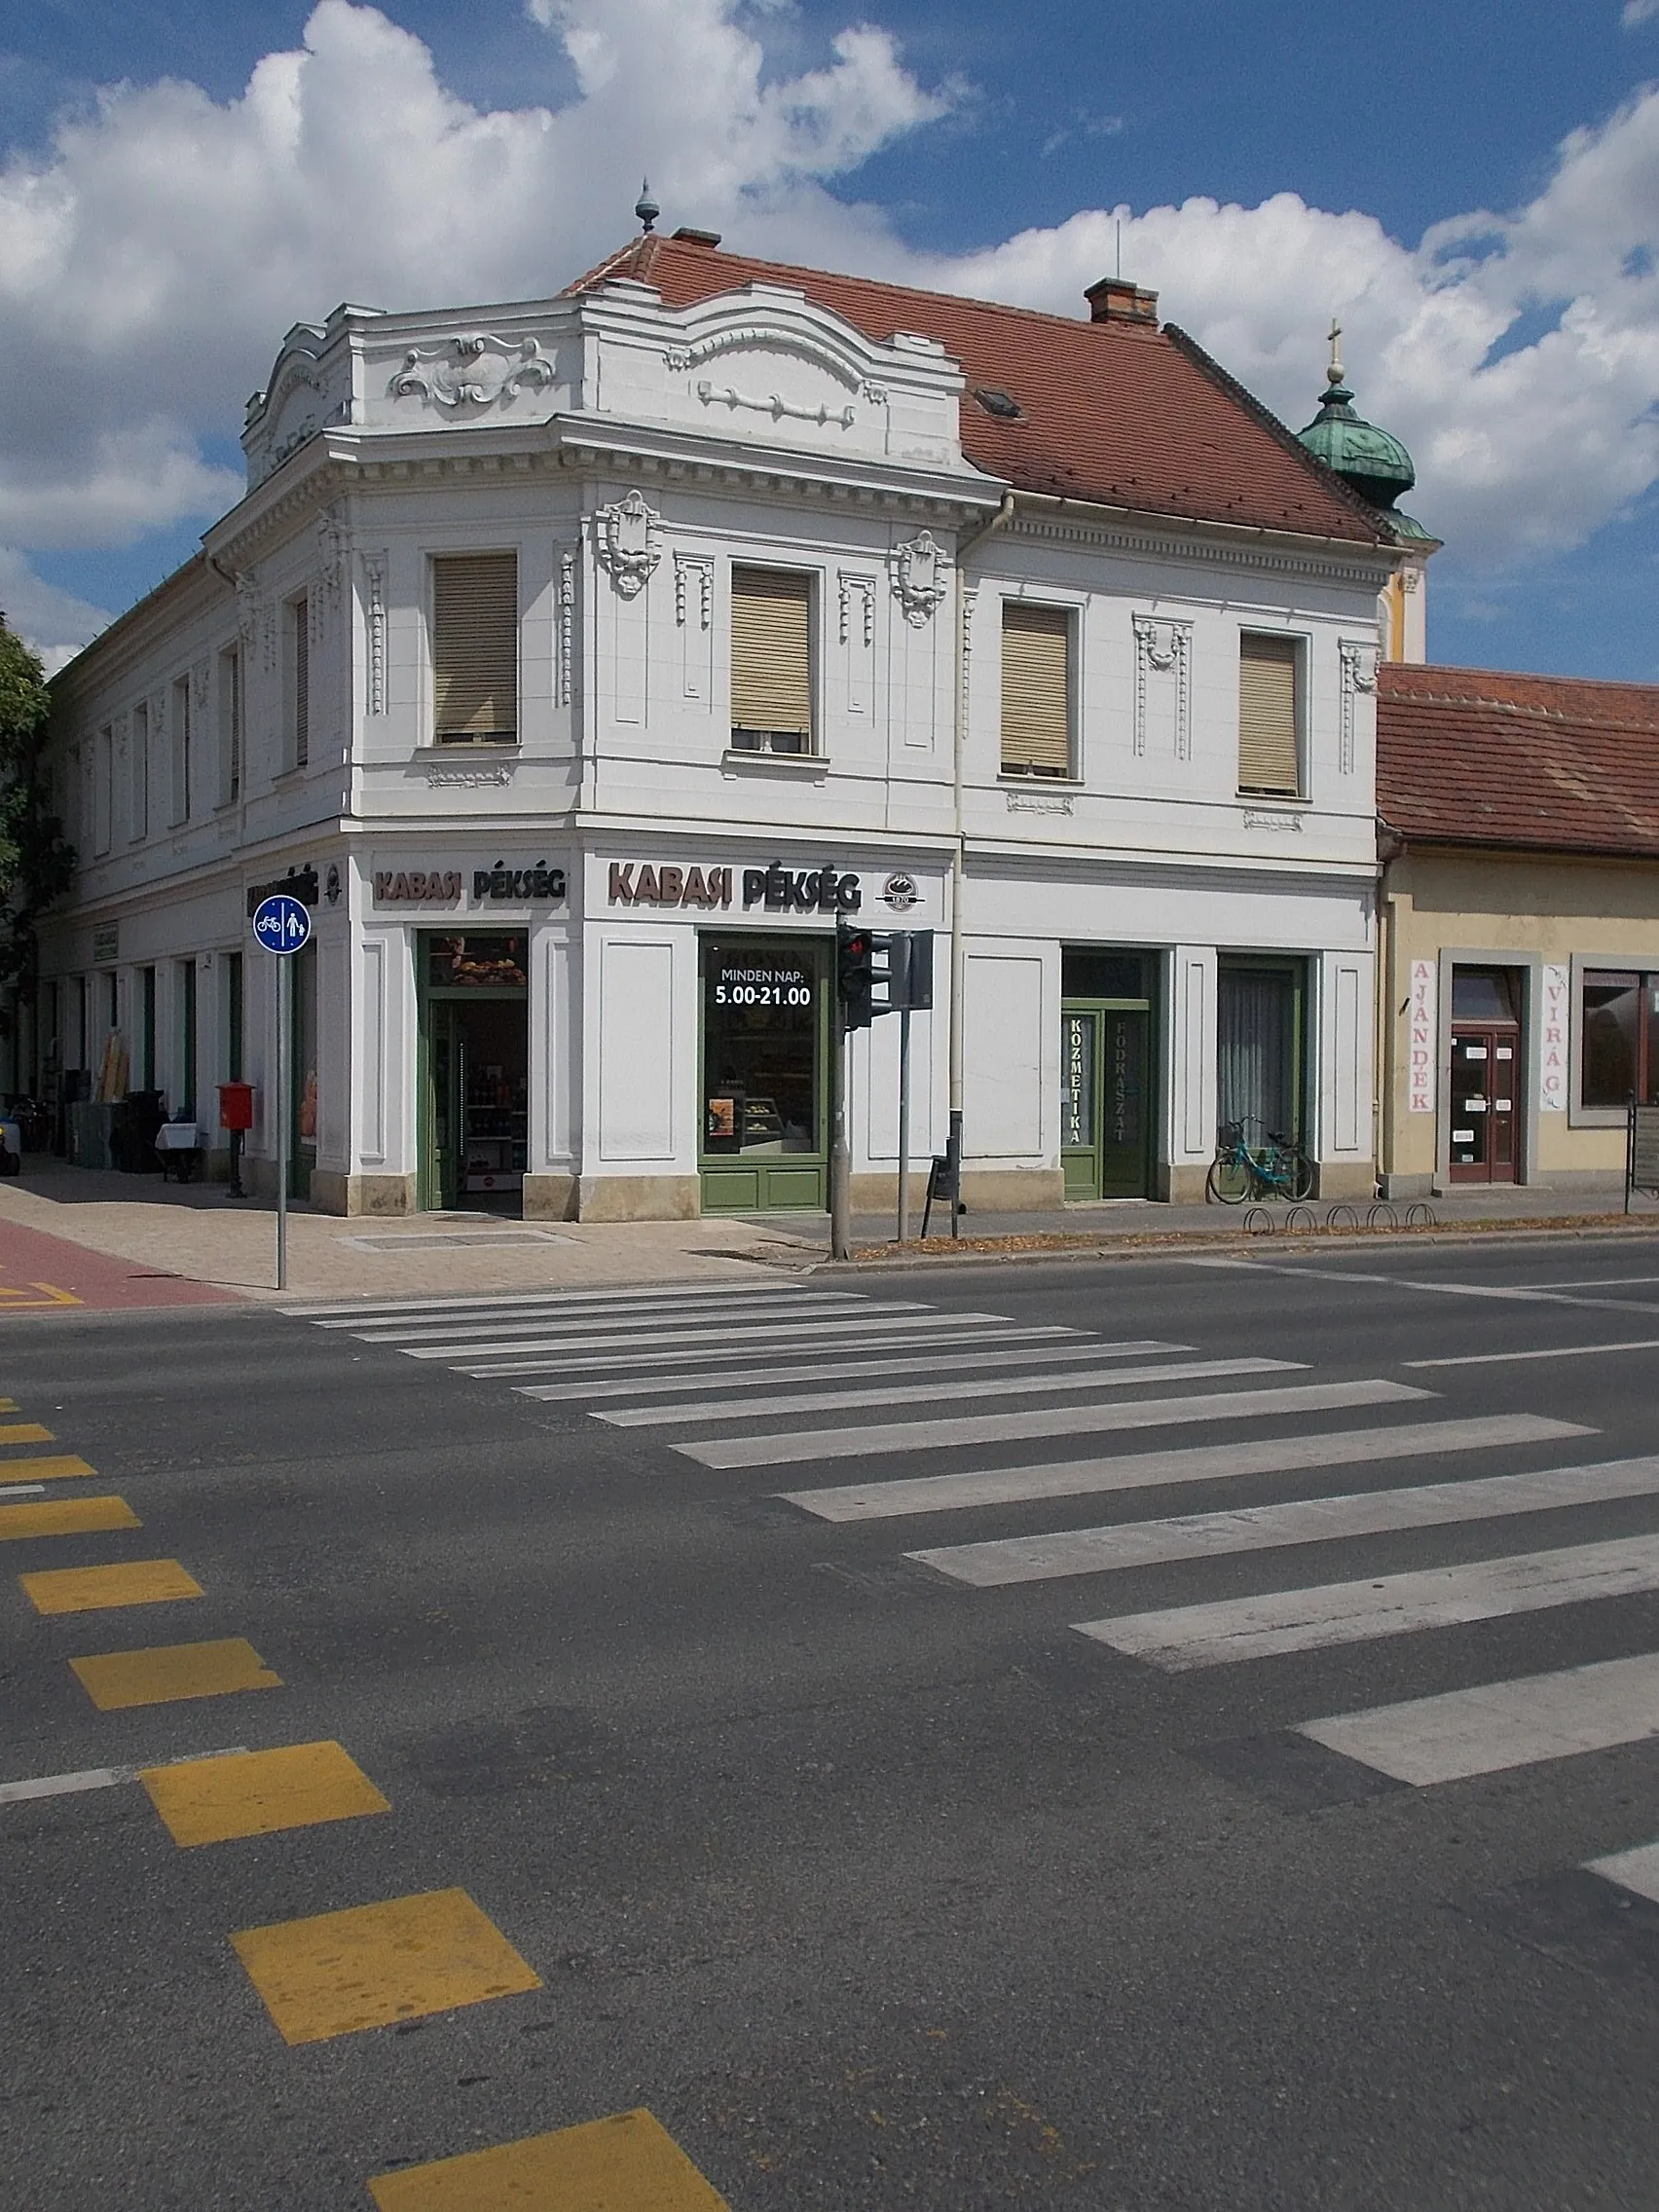 Photo showing: : Corner building with bakery -  Soproni út (Road 85 and Road 86) corner, Downtown, Csorna, Győr-Moson-Sopron County, Hungary